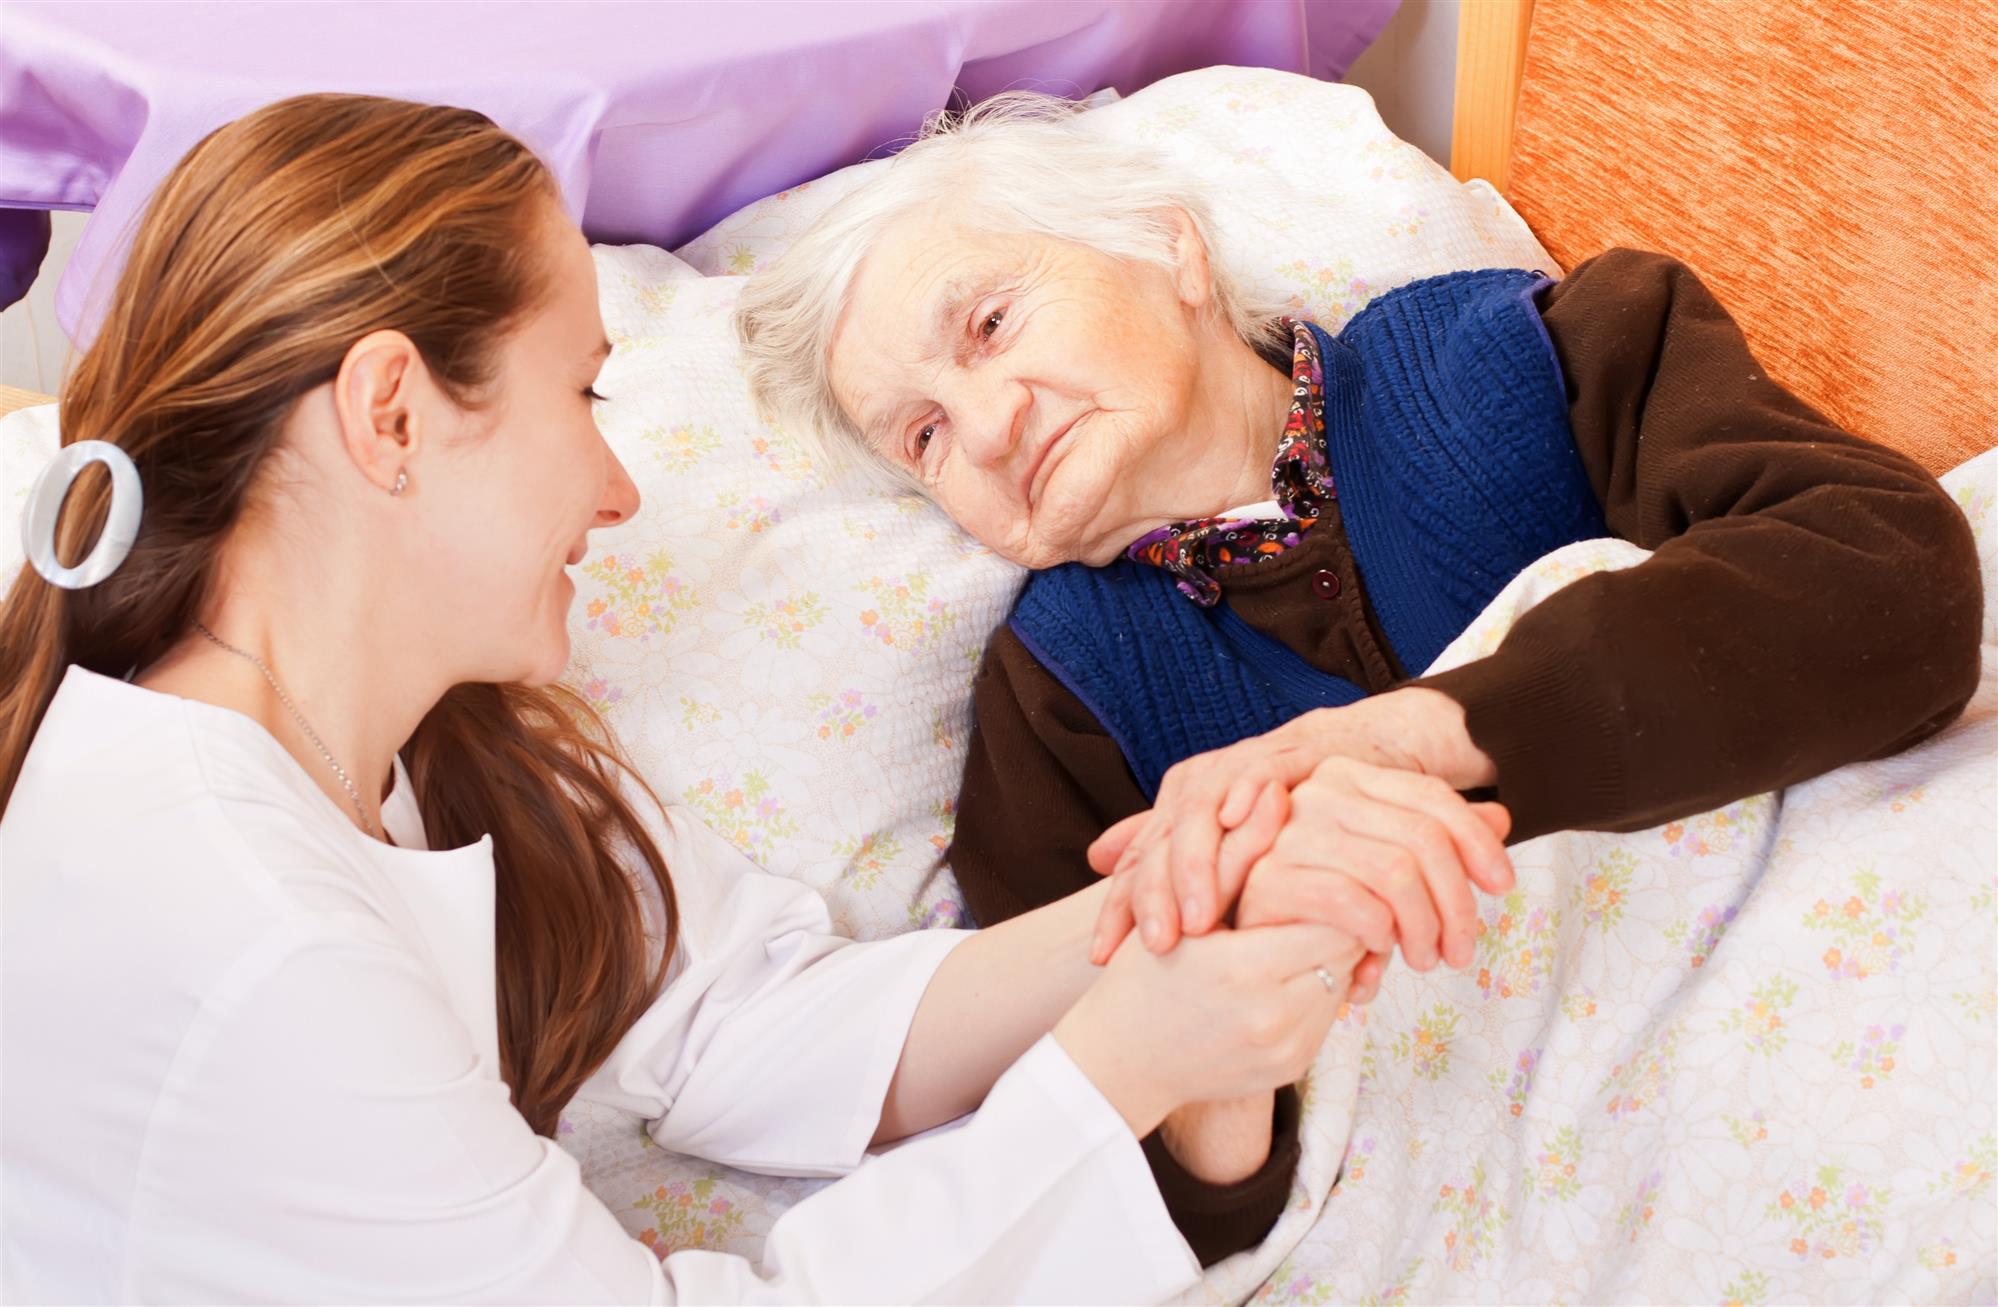 How to Best Assist Patients with Dementia in NYC